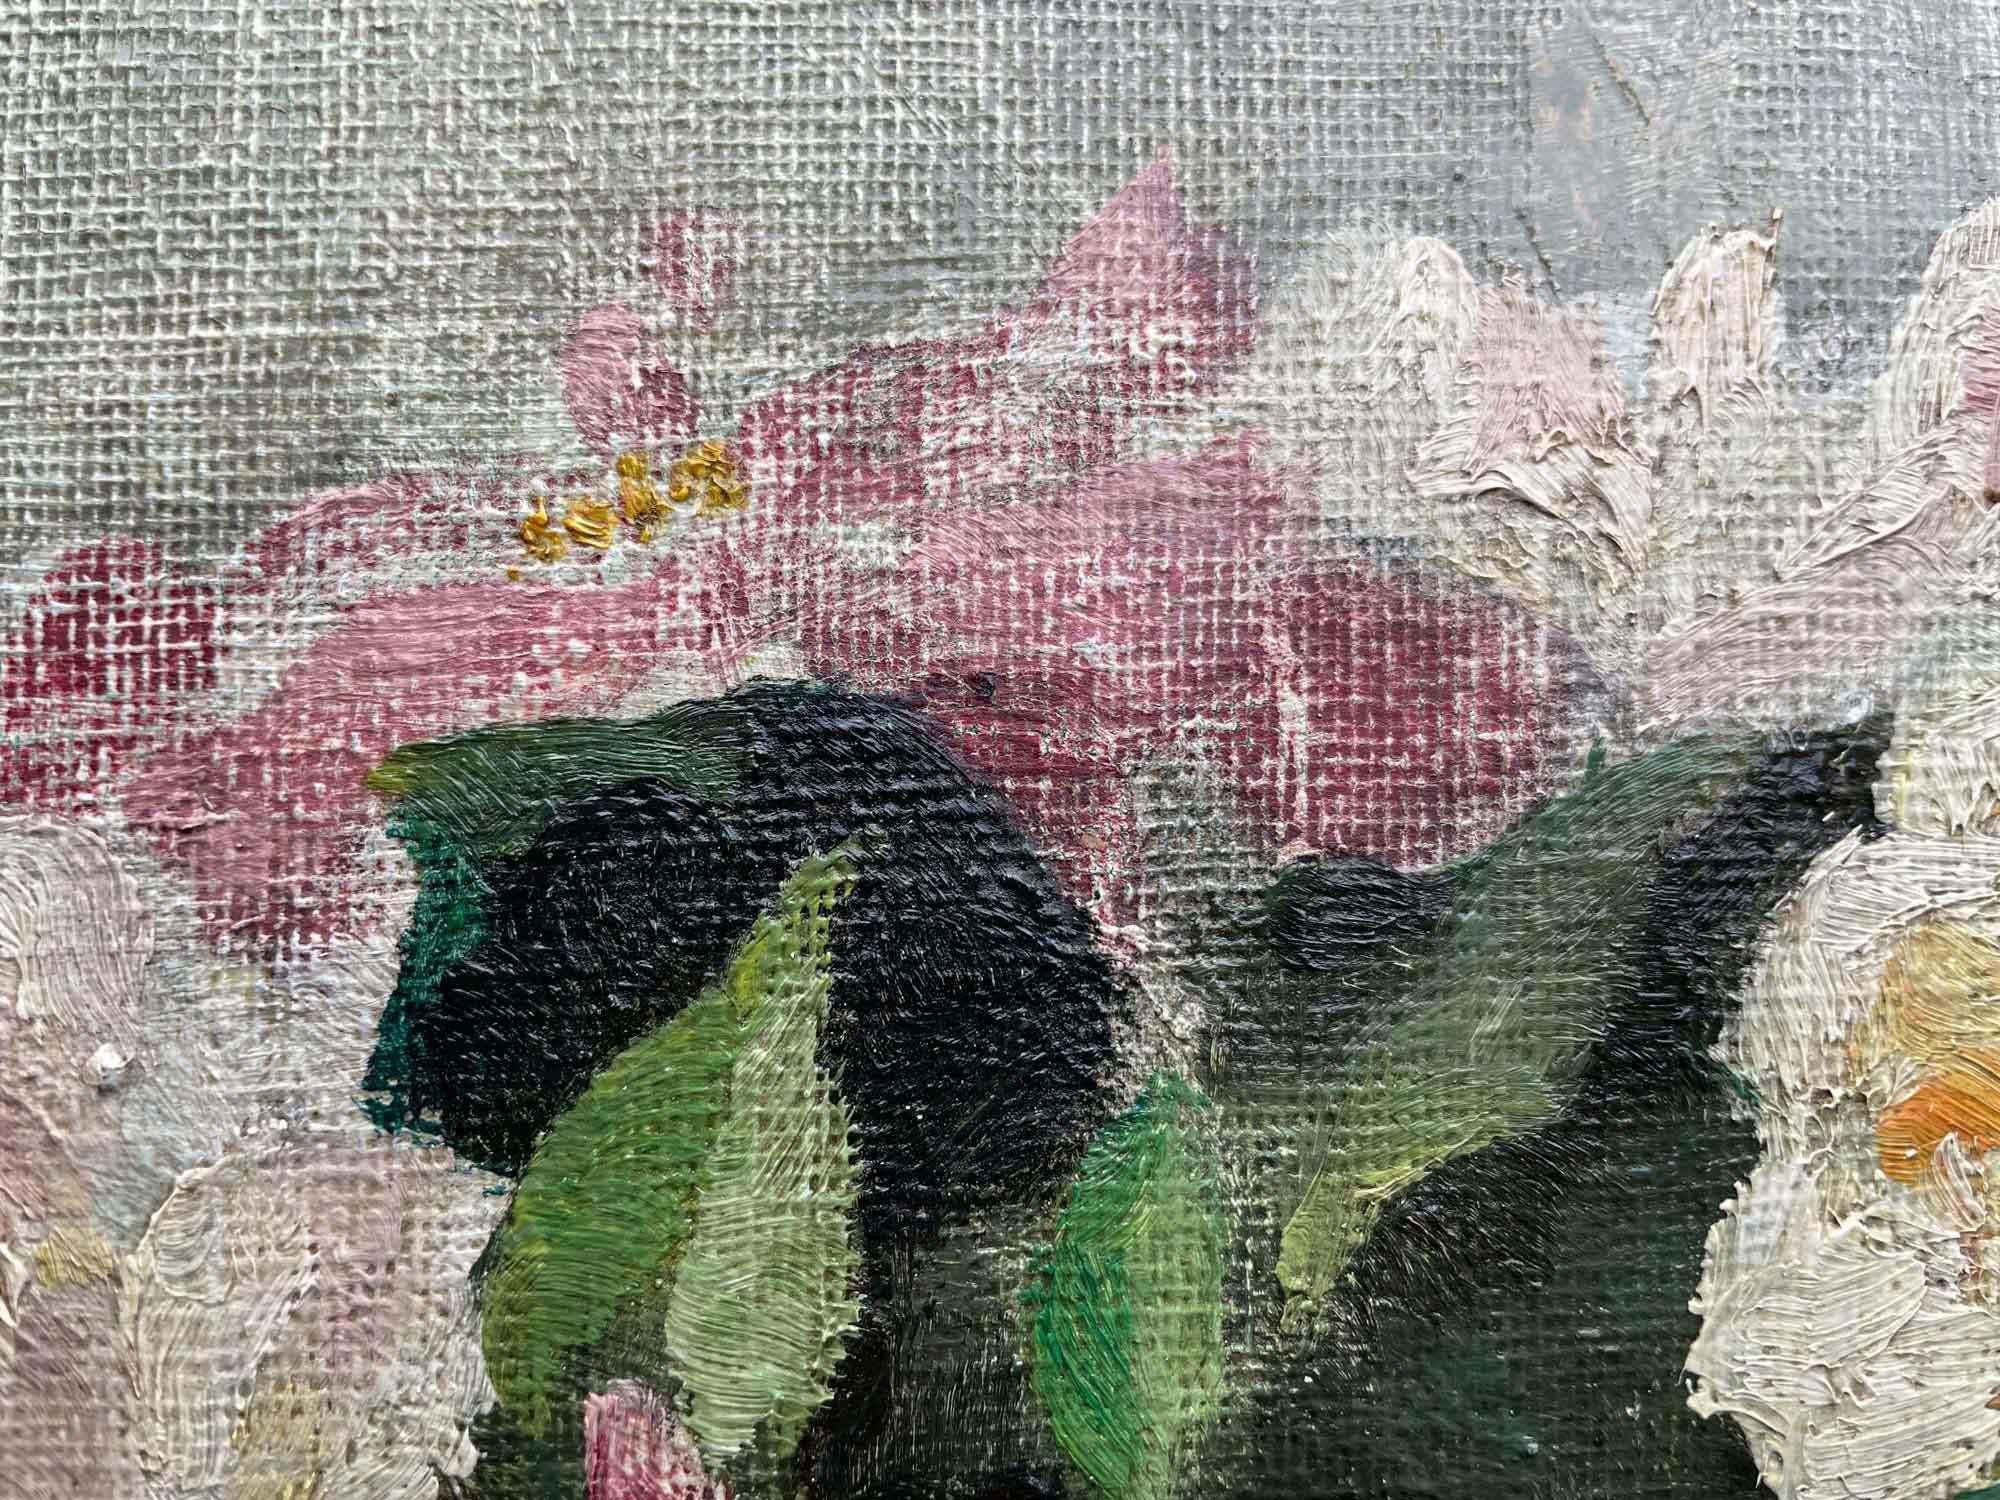 Hand-Painted Roses Painting, Létourneux Yvonne Oil on Canvas, France 1950